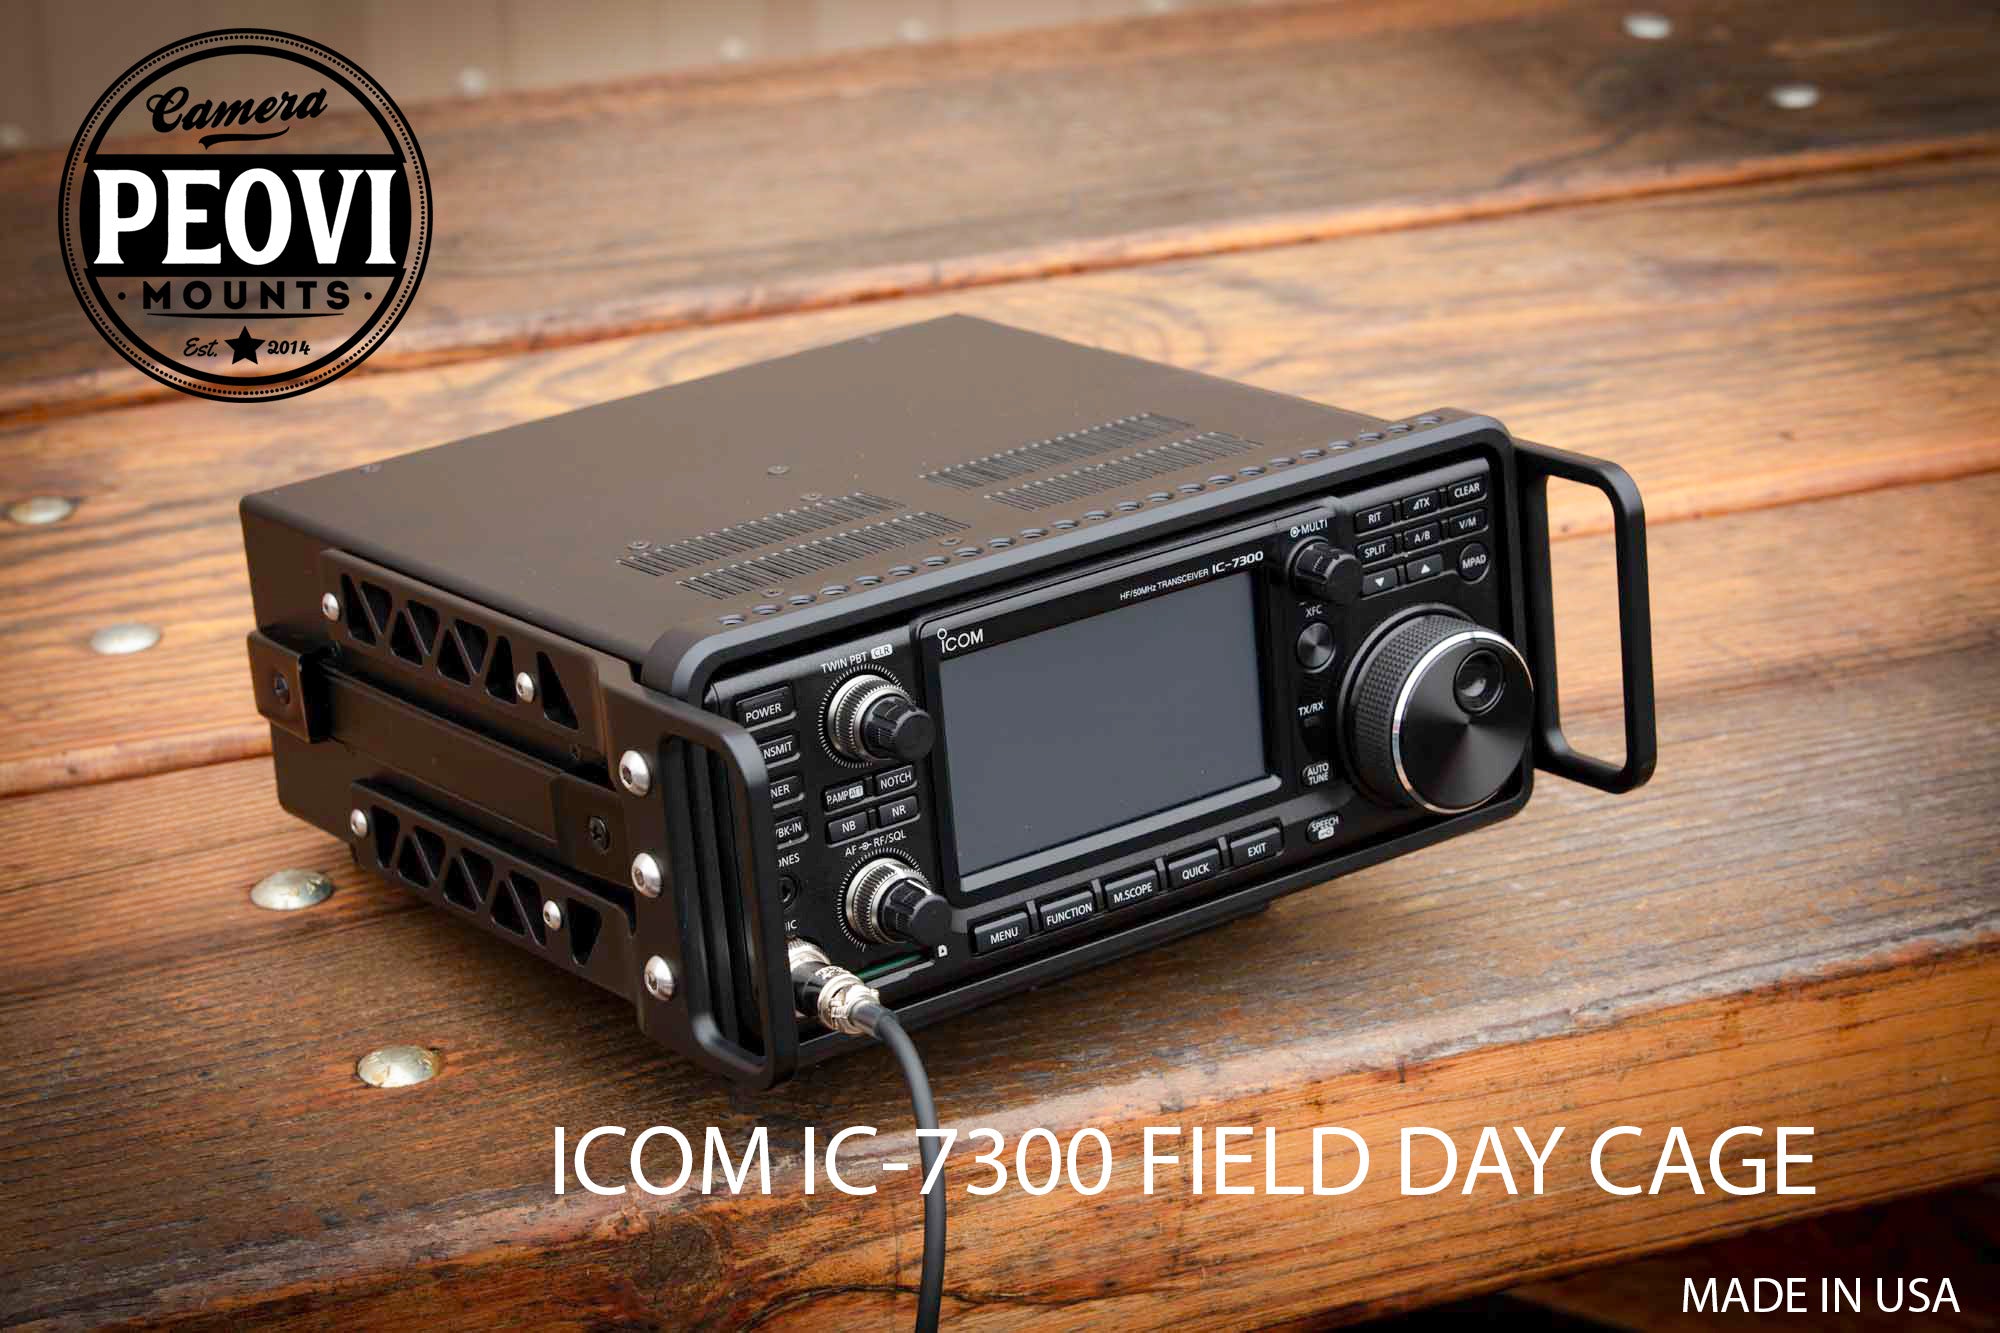 IC-7300 Field Day Cage